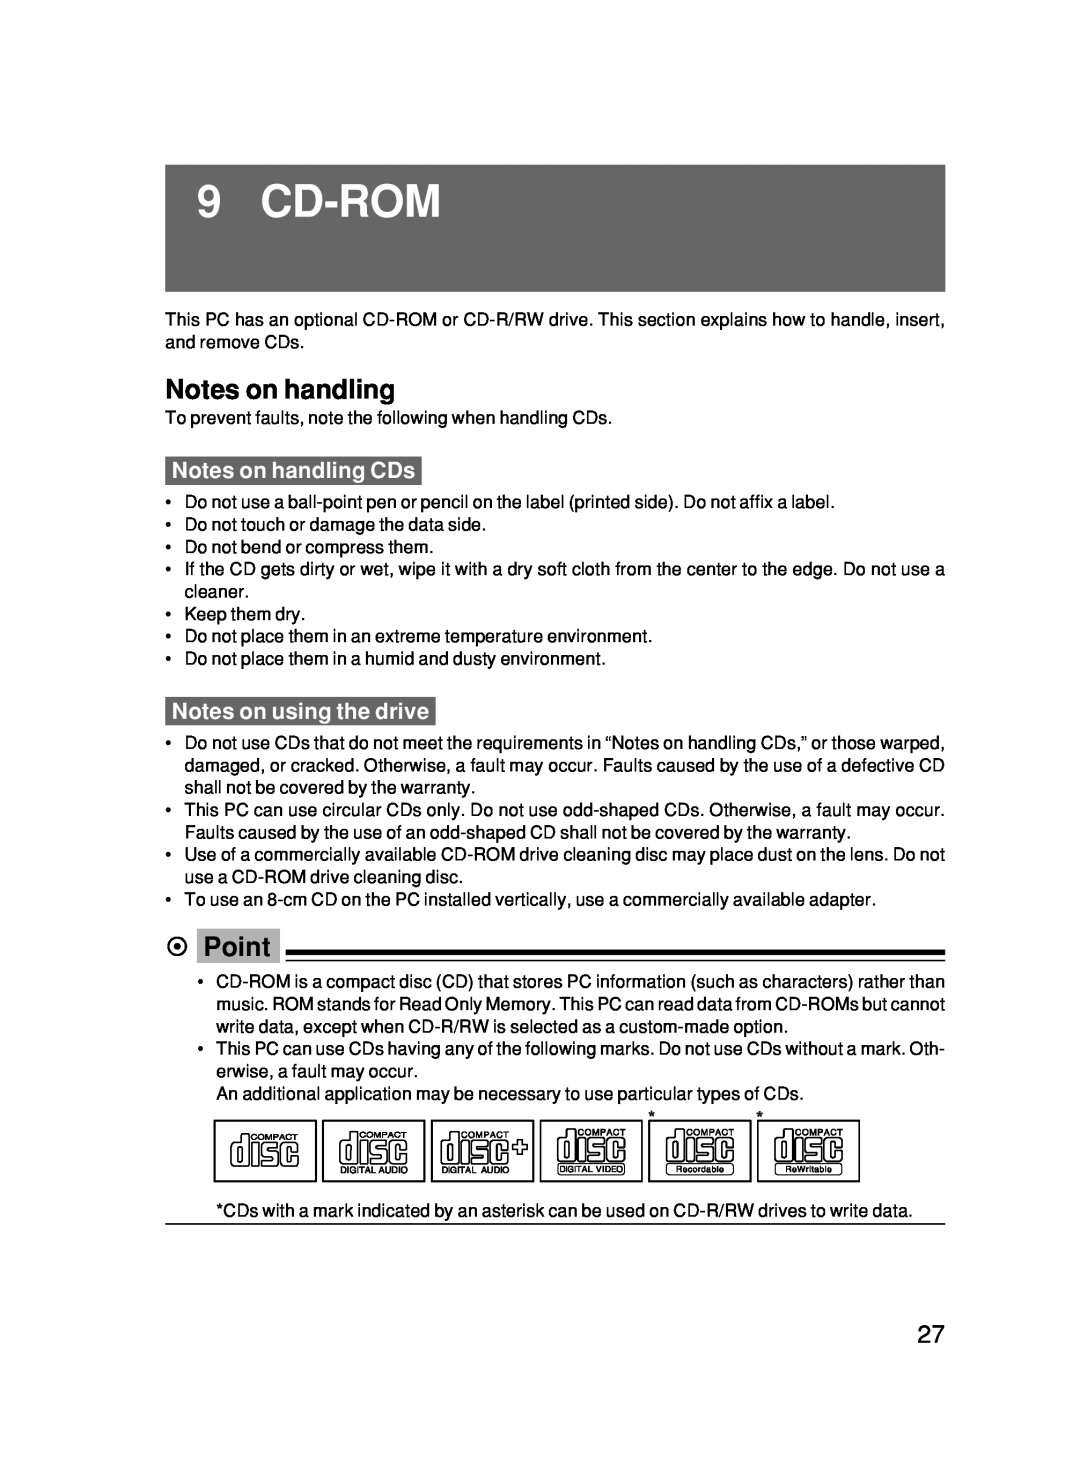 Fujitsu 500 user manual Cd-Rom, Notes on handling CDs, Notes on using the drive, Point 